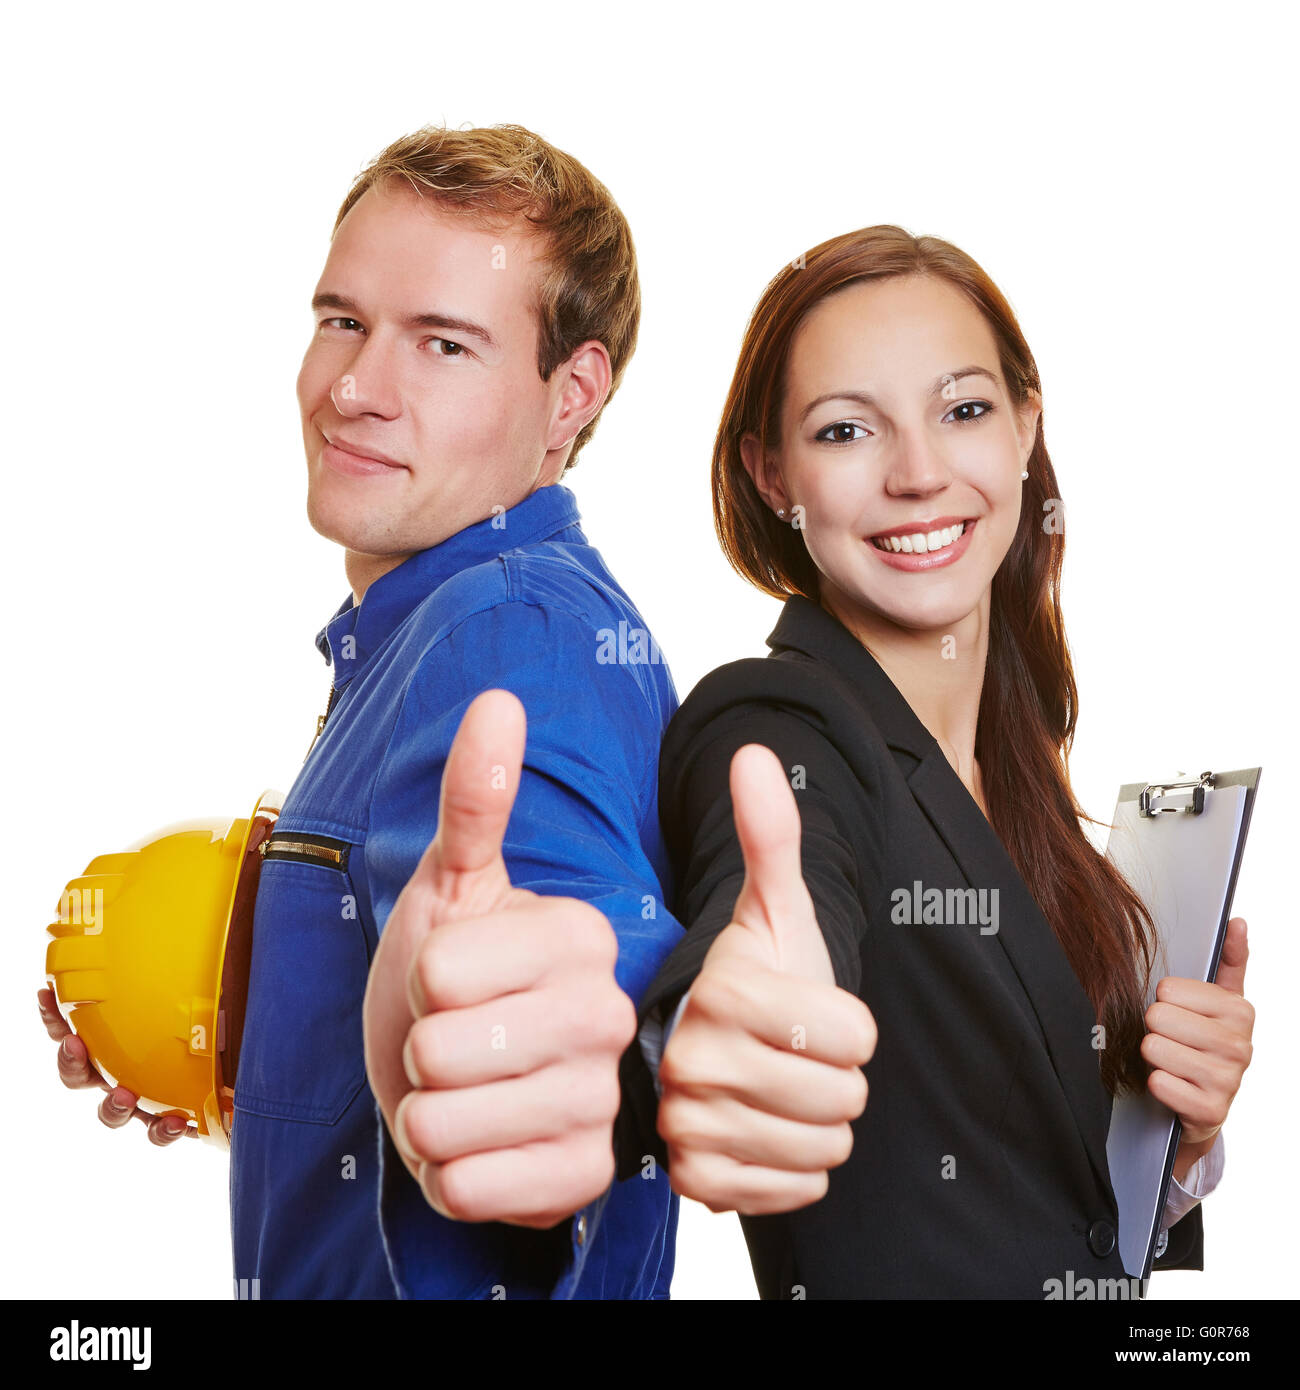 Worker and business woman holding thumbs up together and smiling Stock Photo